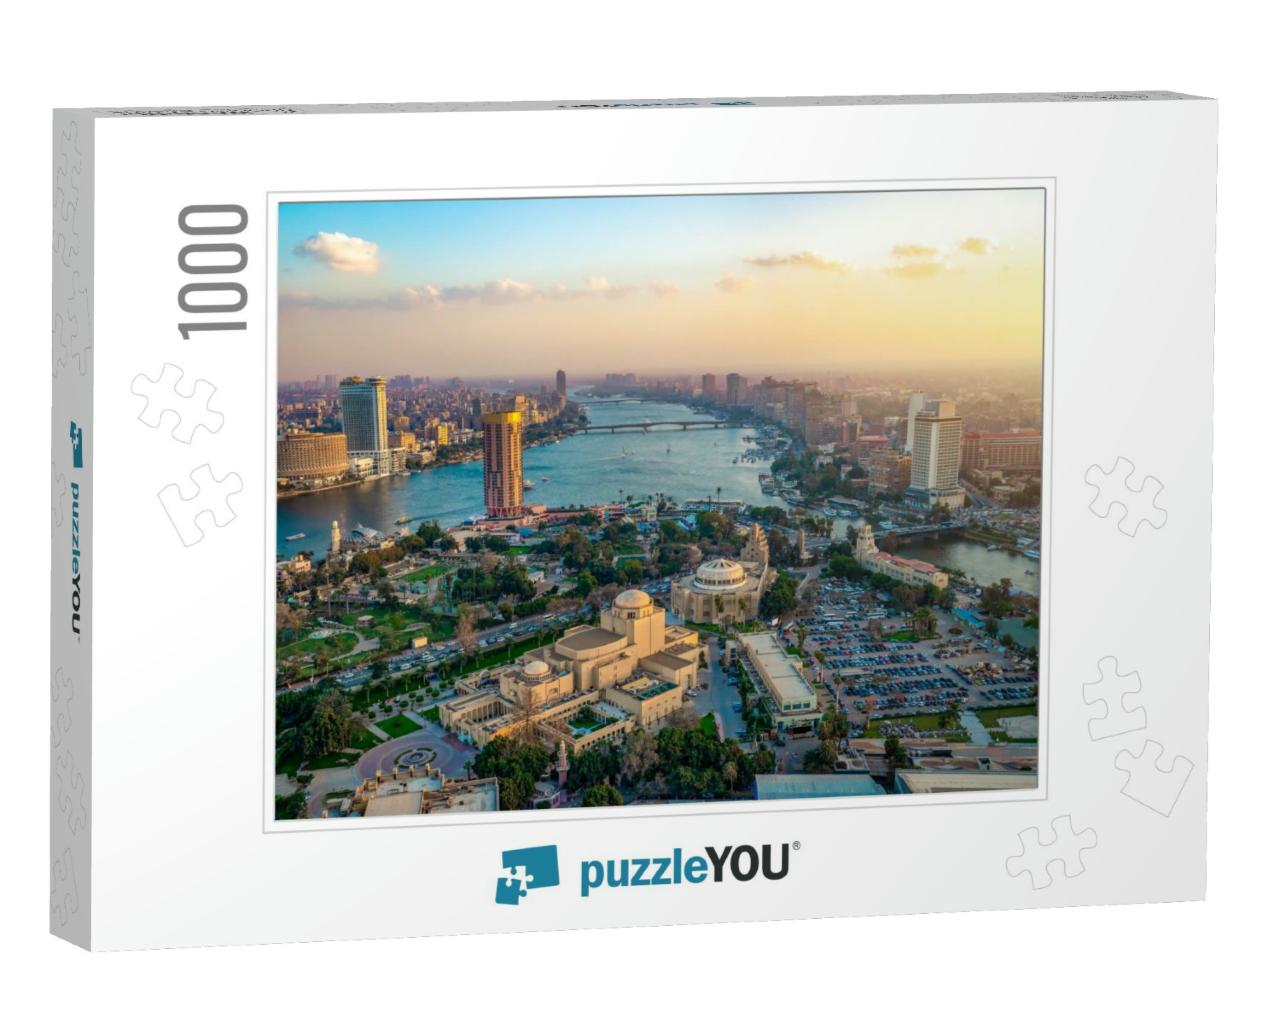 Panorama of Cairo Cityscape Taken During the Sunset from... Jigsaw Puzzle with 1000 pieces